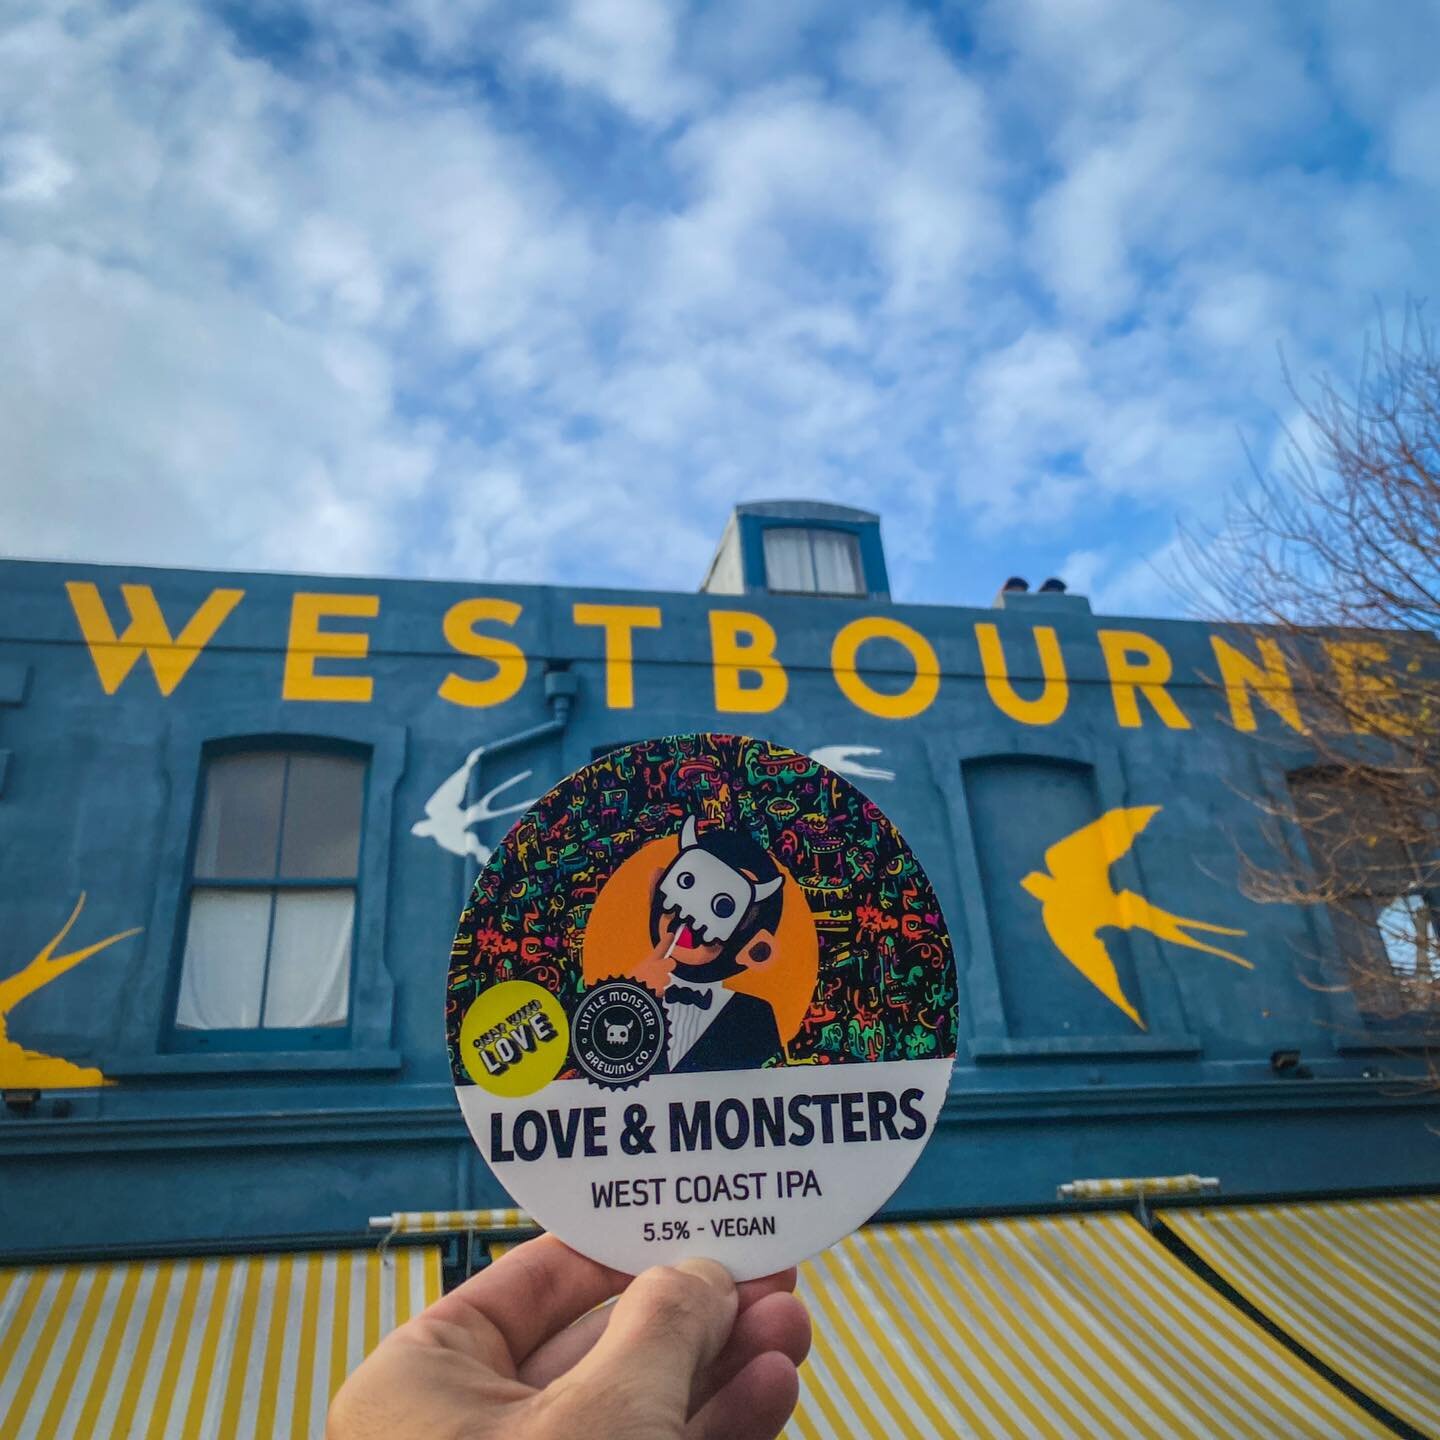 Who&rsquo;s up for a cheeky cask West Coast IPA? 

Tomorrow we are one of a select few venues launching Love &amp; Monsters, a collaboration between @onlywith_love and @littlemonsterbrew 

#sussexcraftbeer #westbournehove #westcoastipa